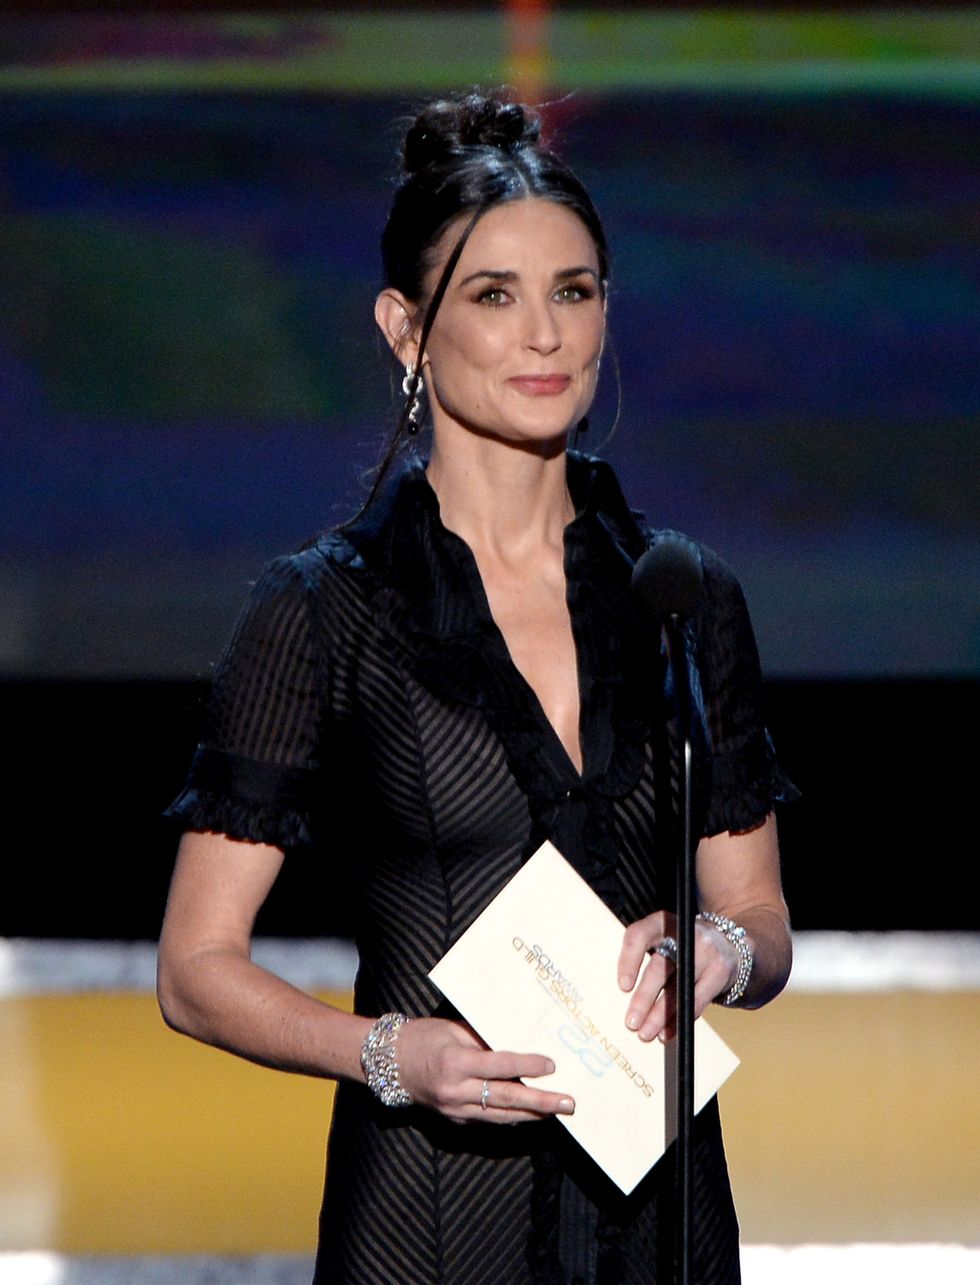 LOS ANGELES, CA - JANUARY 30:  Actress Demi Moore speaks onstage during the 22nd Annual Screen Actors Guild Awards at The Shrine Auditorium on January 30, 2016 in Los Angeles, California.  (Photo by Kevork Djansezian/Getty Images)